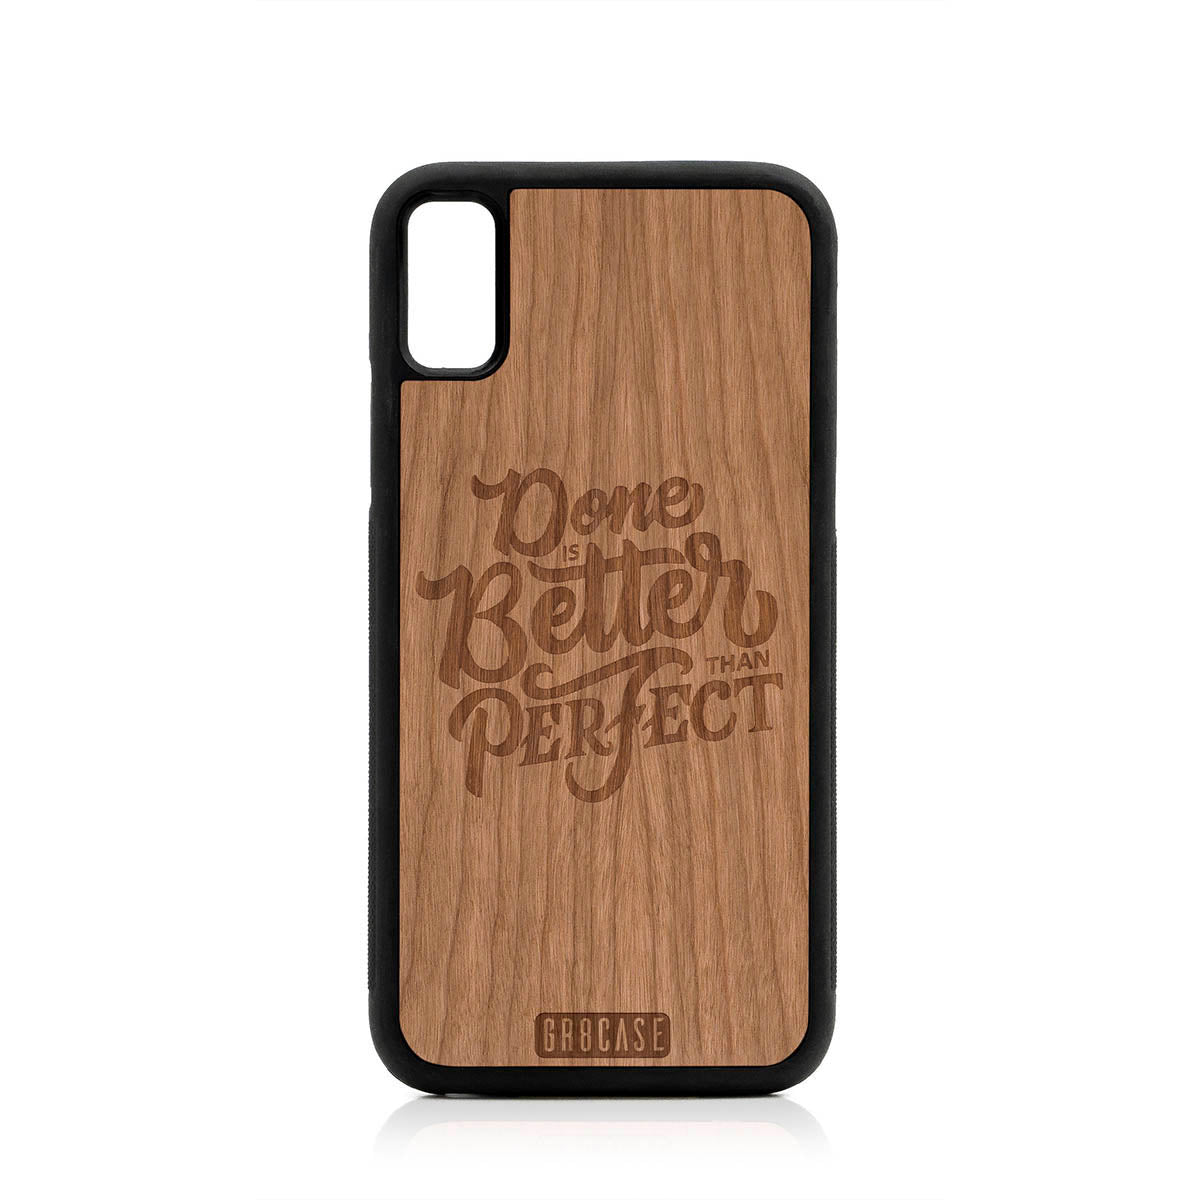 Done Is Better Than Perfect Design Wood Case For iPhone XR by GR8CASE